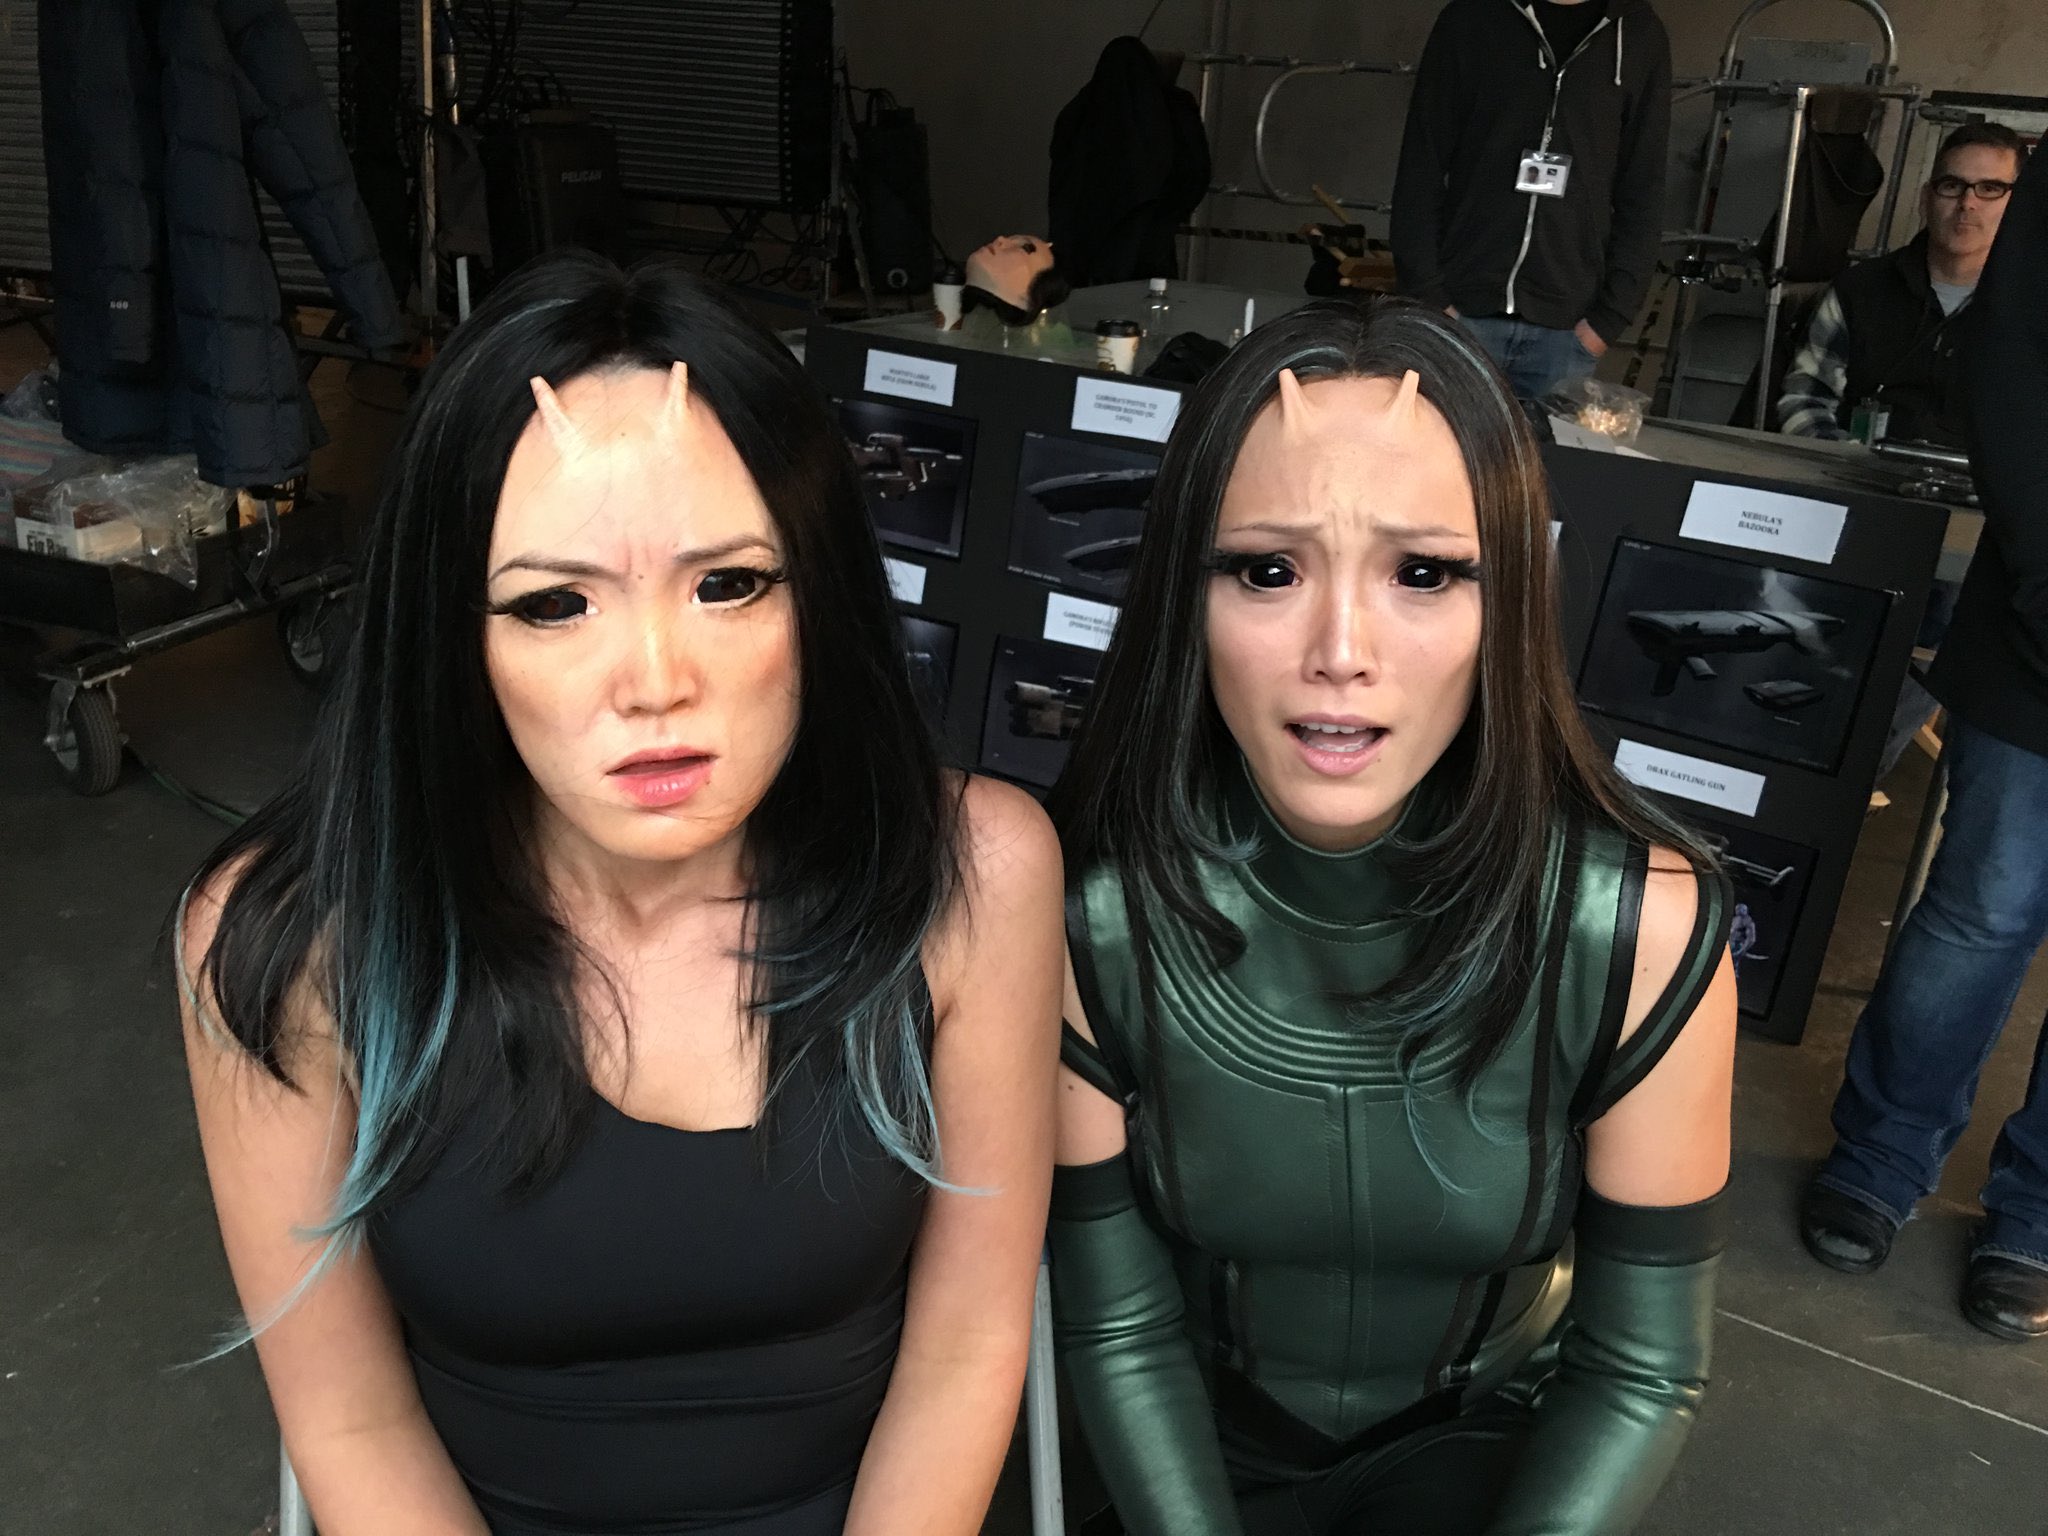 best of pom Twitter: klementieff with her stunt double in a mantis mask https://t.co/2GiJ9Va0mO" / Twitter